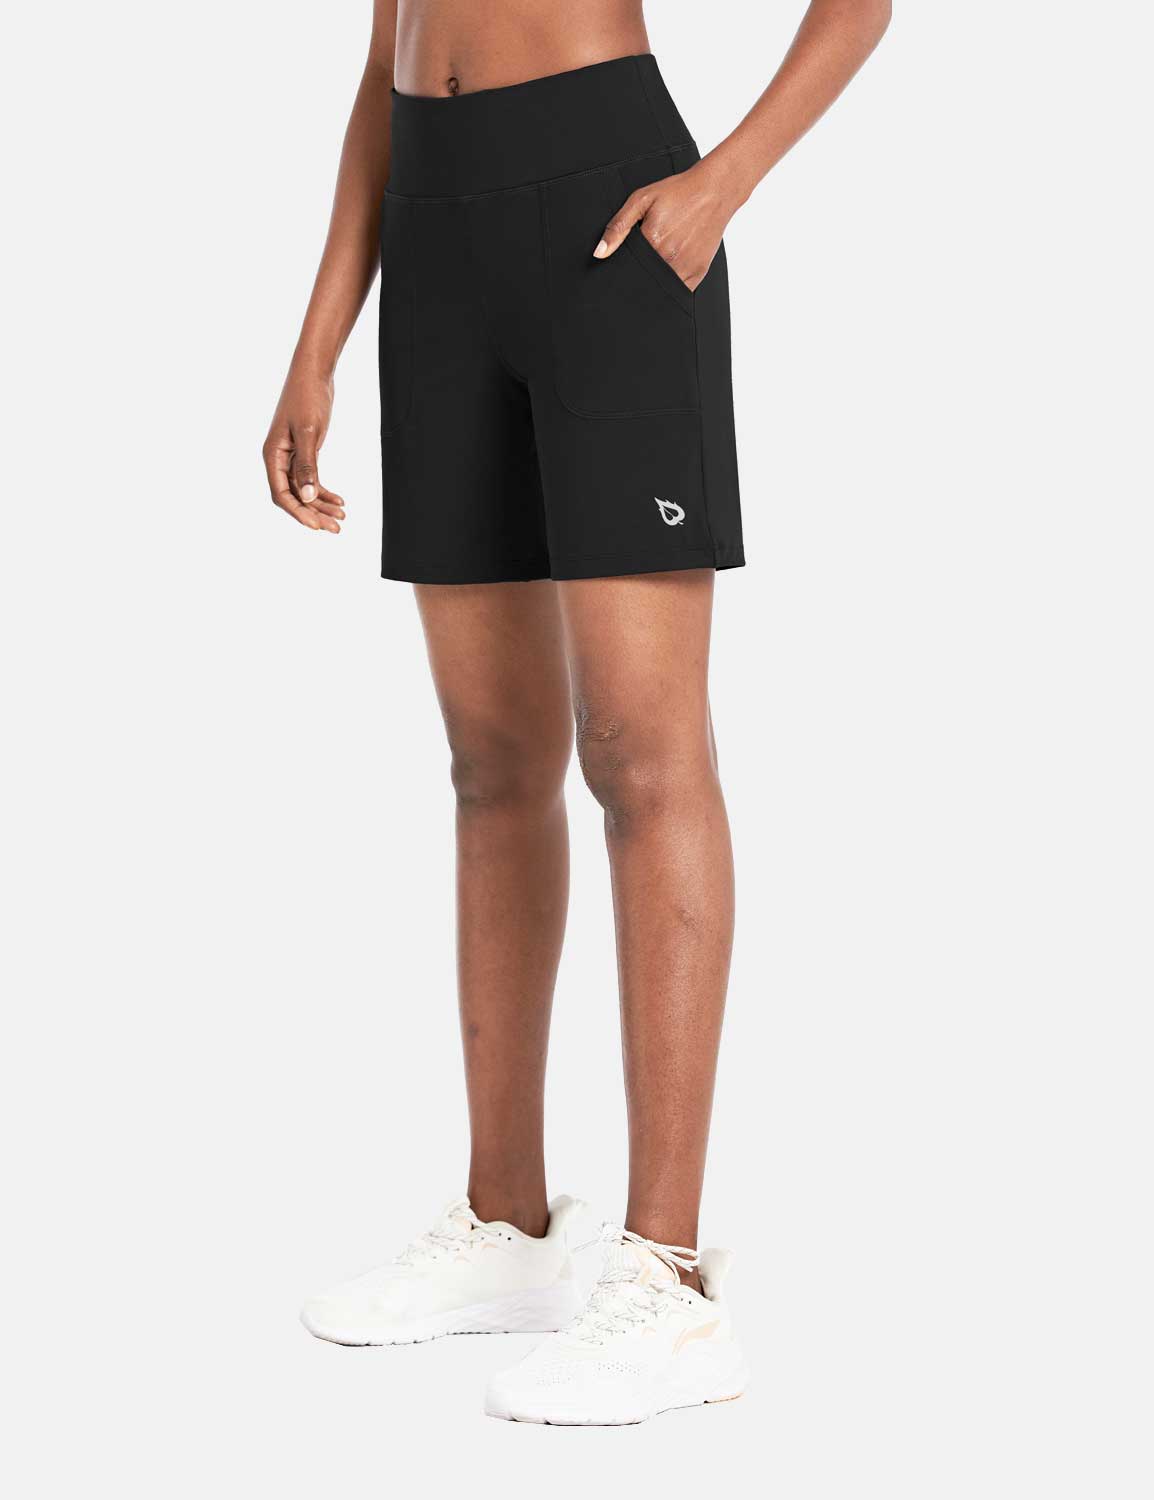 BALEAF Women's 5 Running Shorts with Liner Quick Dry High Waisted Athletic  Gym Lined Shorts Workout Zipper Pocket Black Size XL - Yahoo Shopping